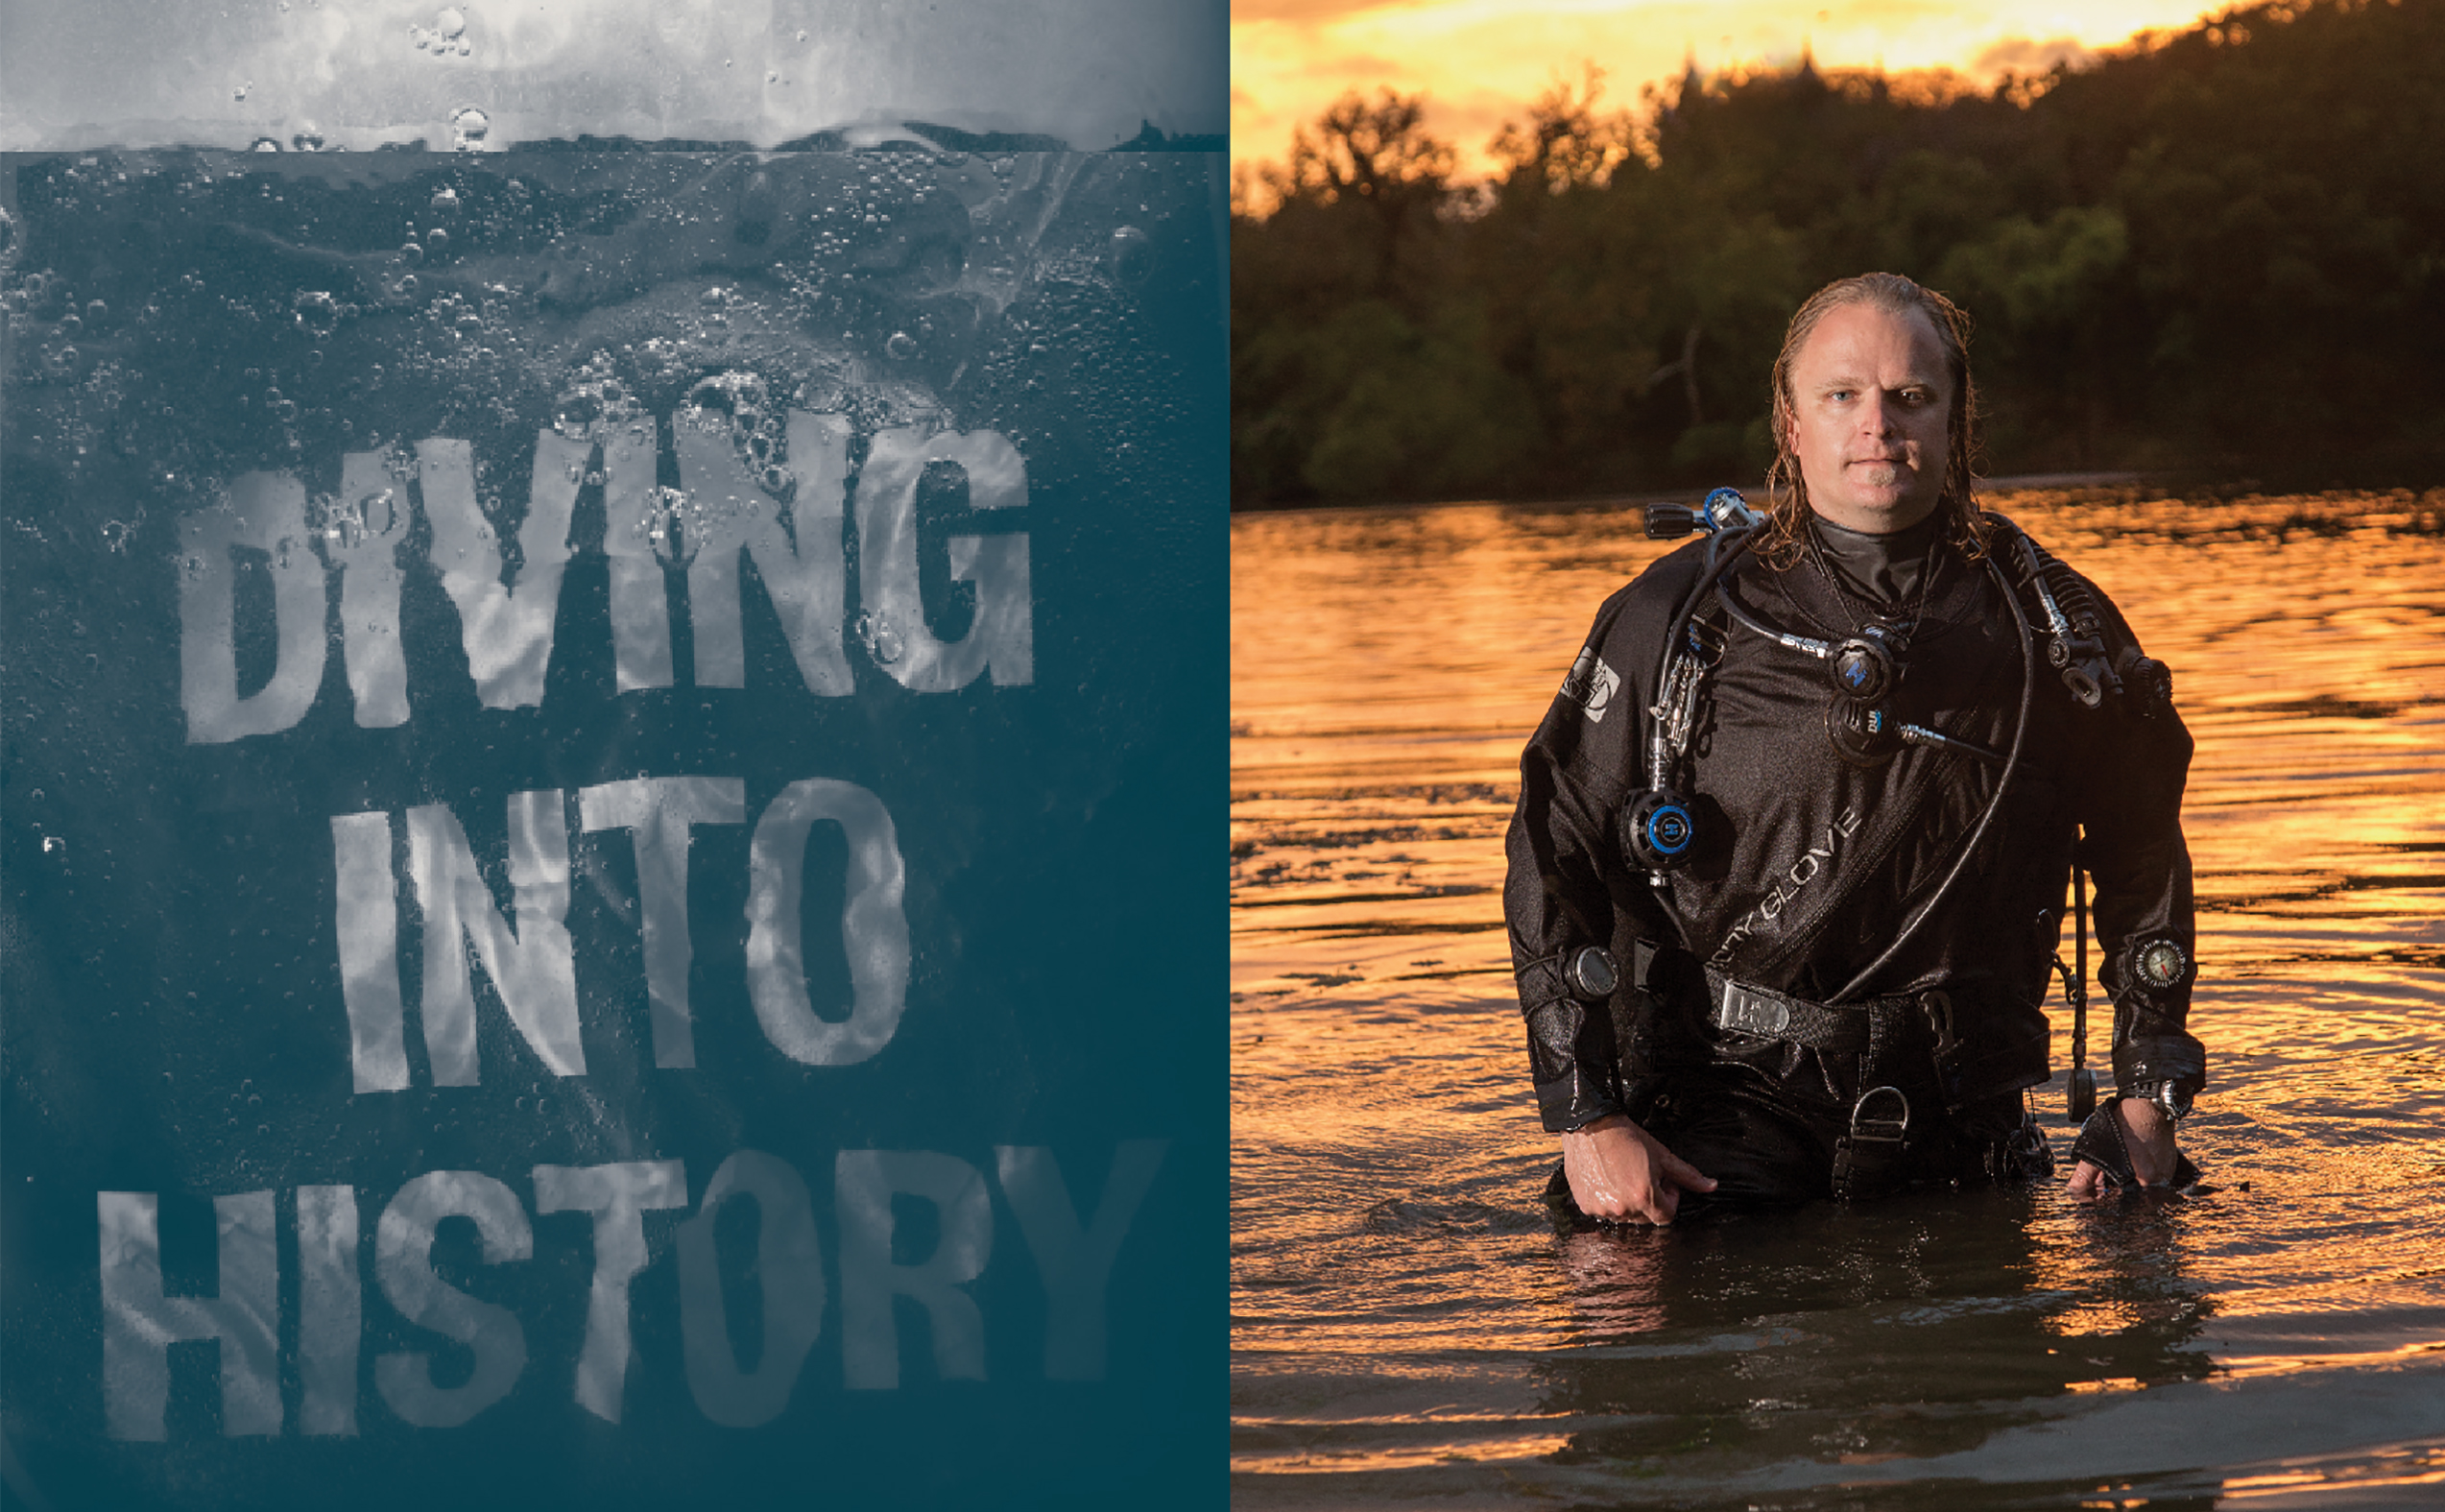 Reads "Diving into History"; Man standing in waist-deep water with scuba gear on.